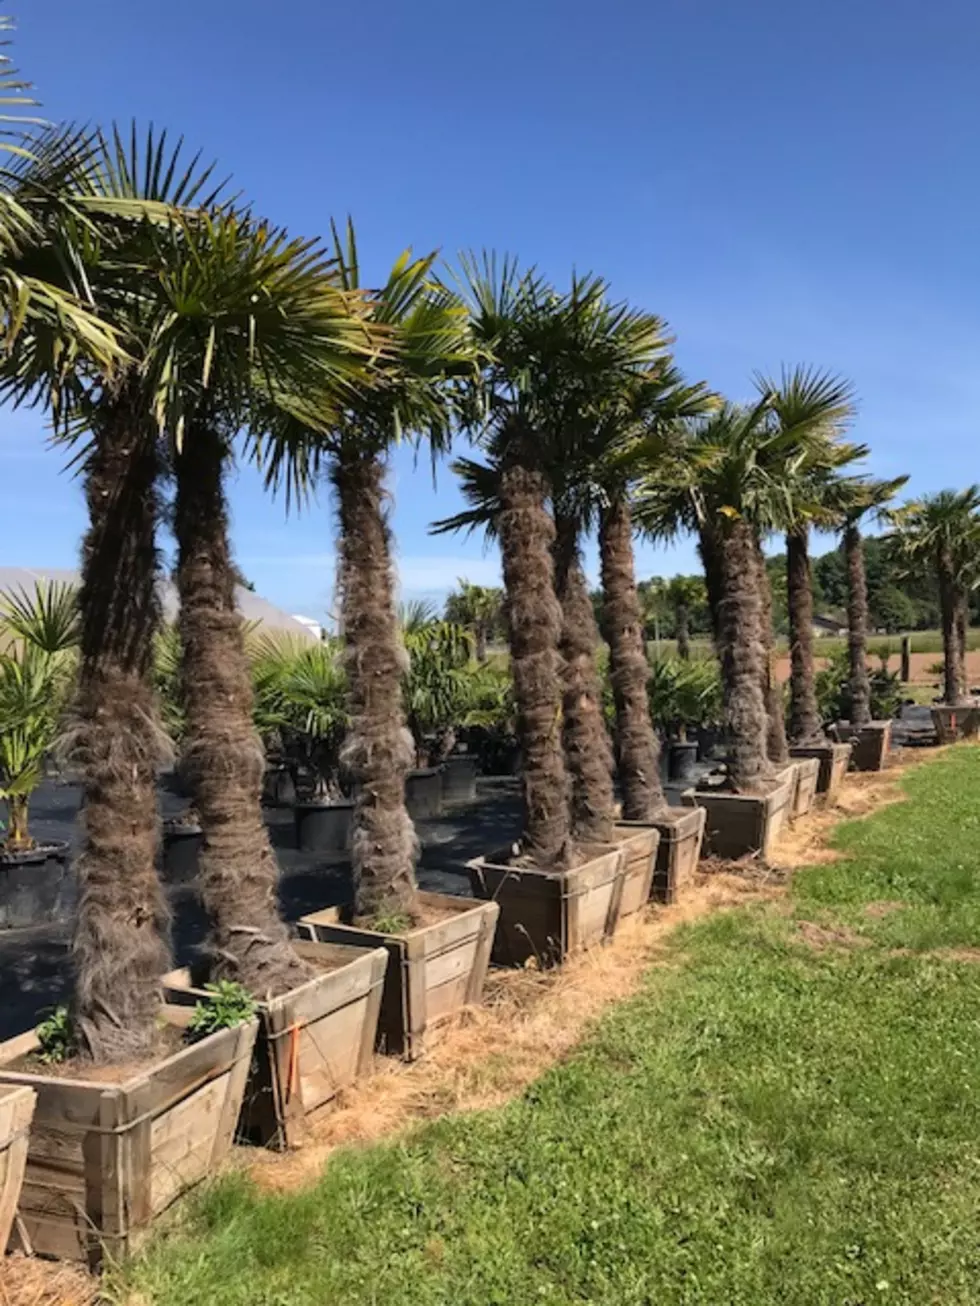 Palm Trees That Grow In Tri-Cities?